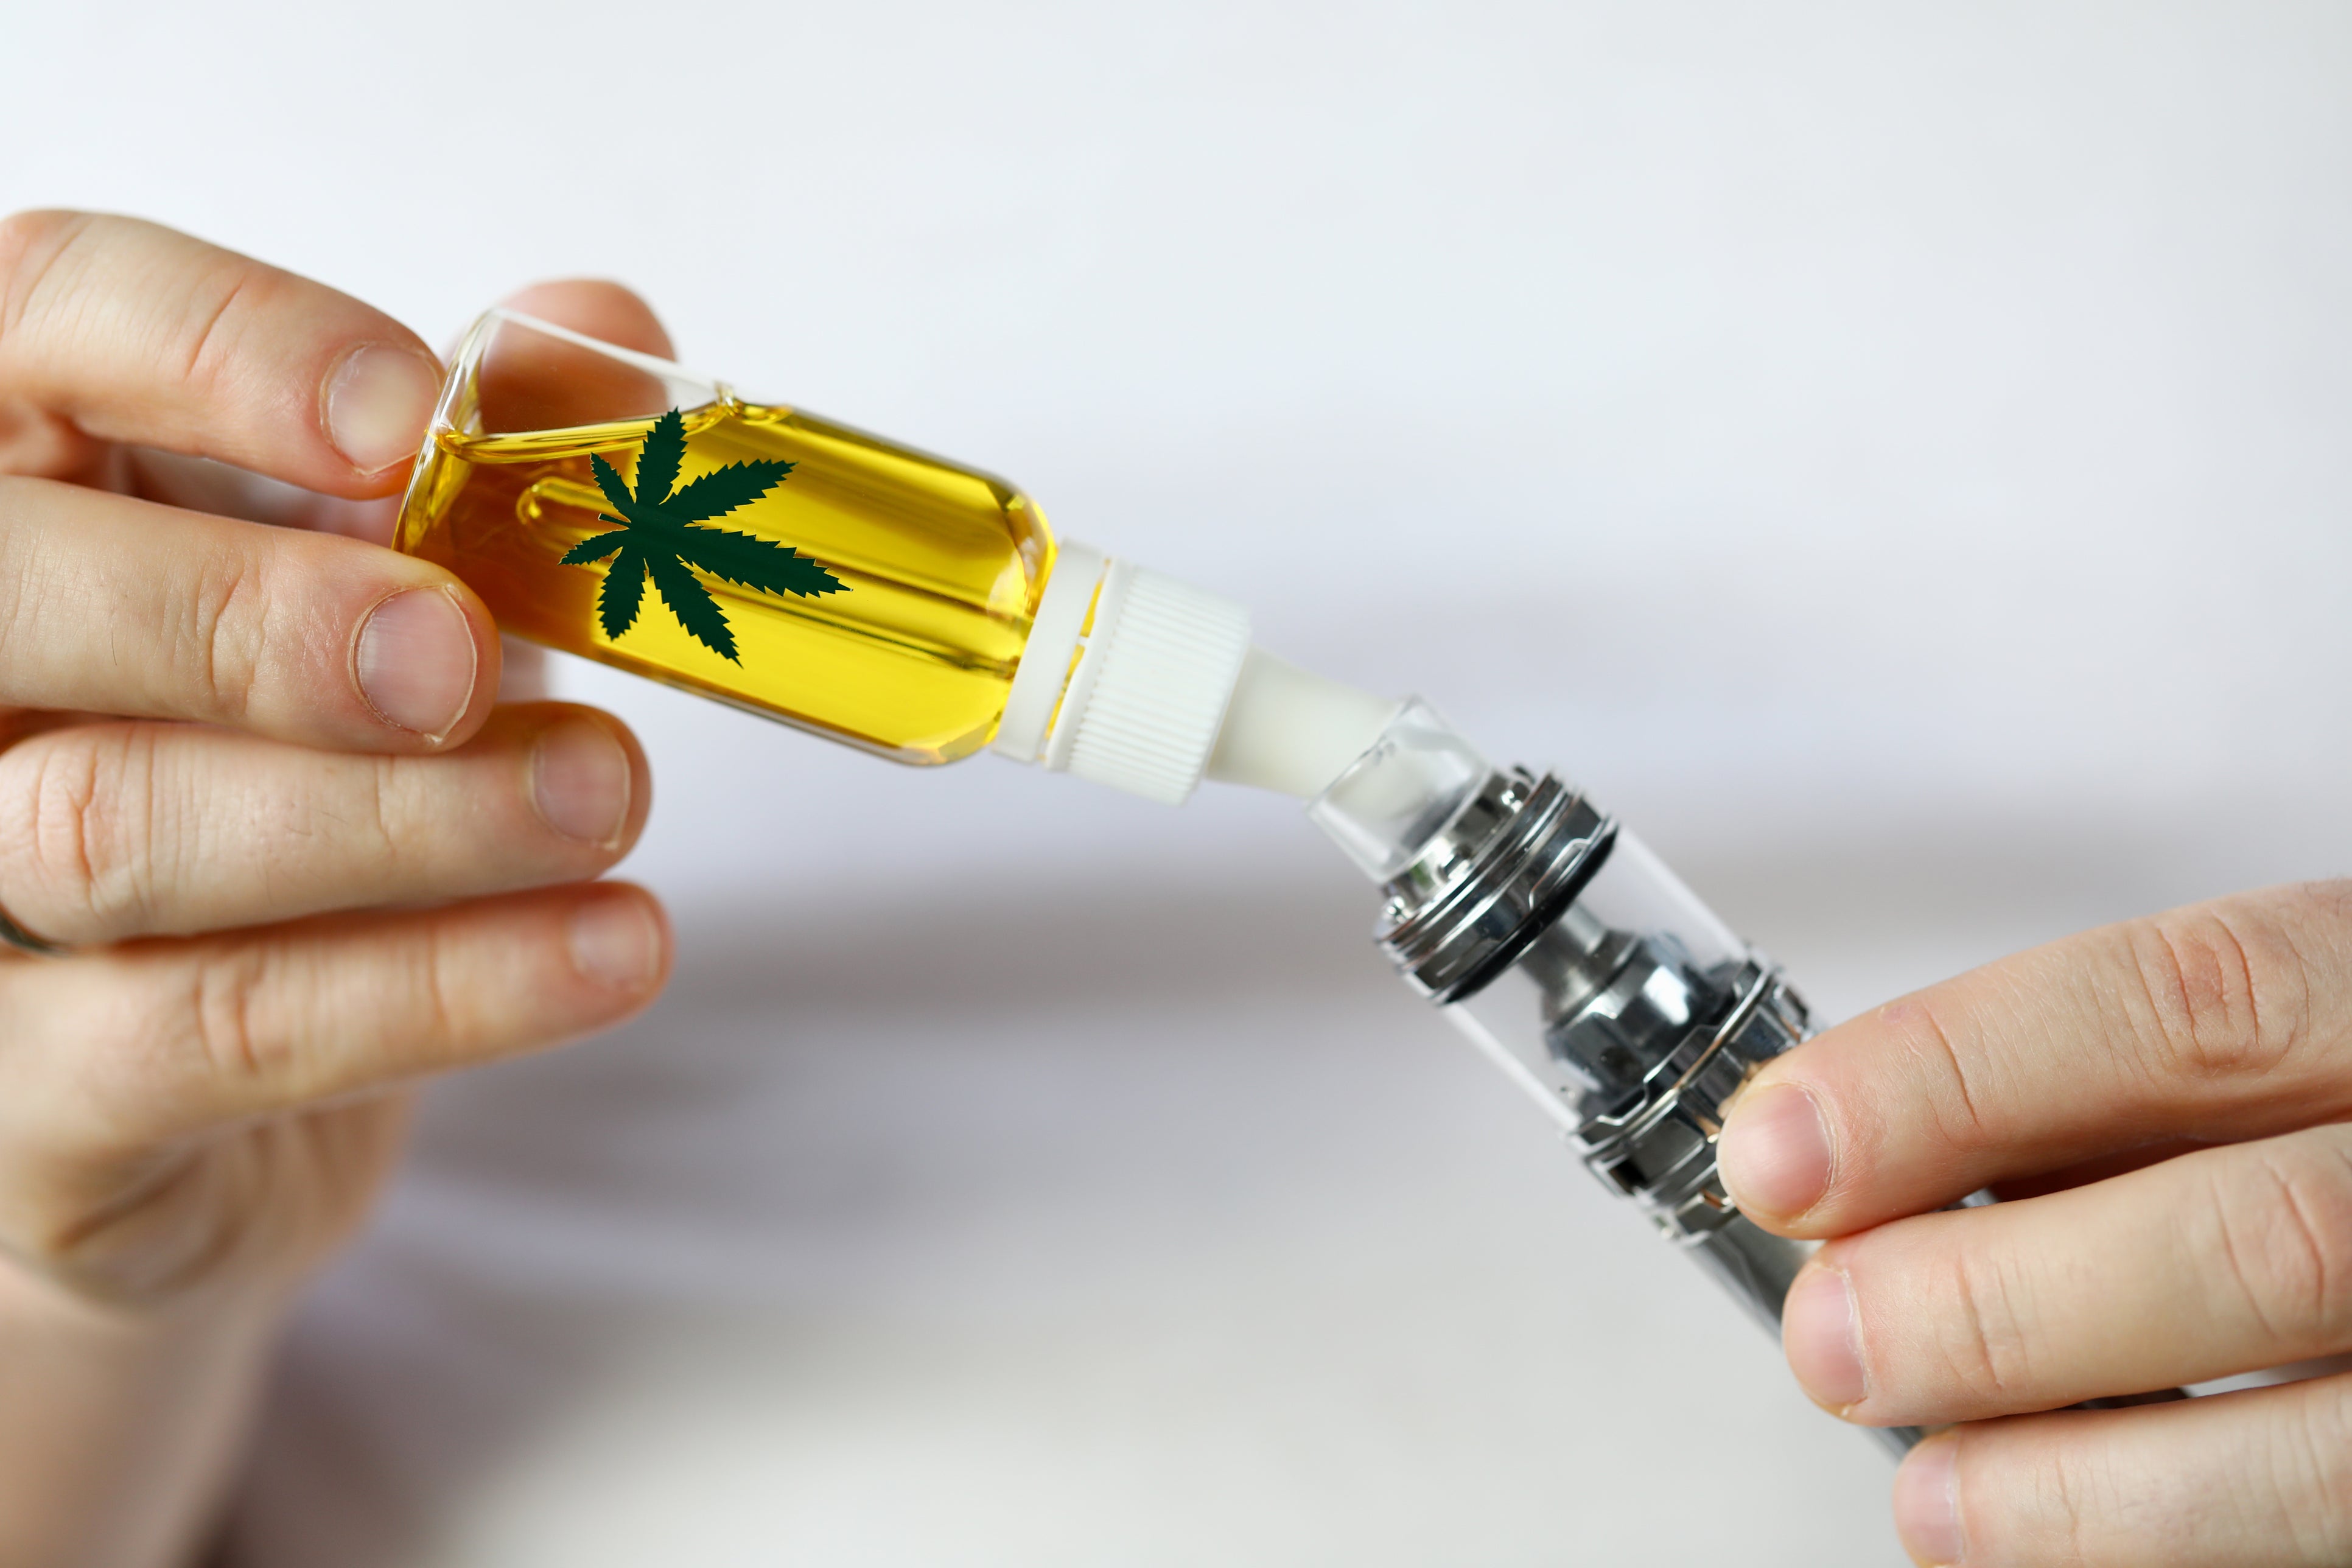 A weed vape cartridge is being filled up with THC oil and cannabis-derived terpenes from a tincture.